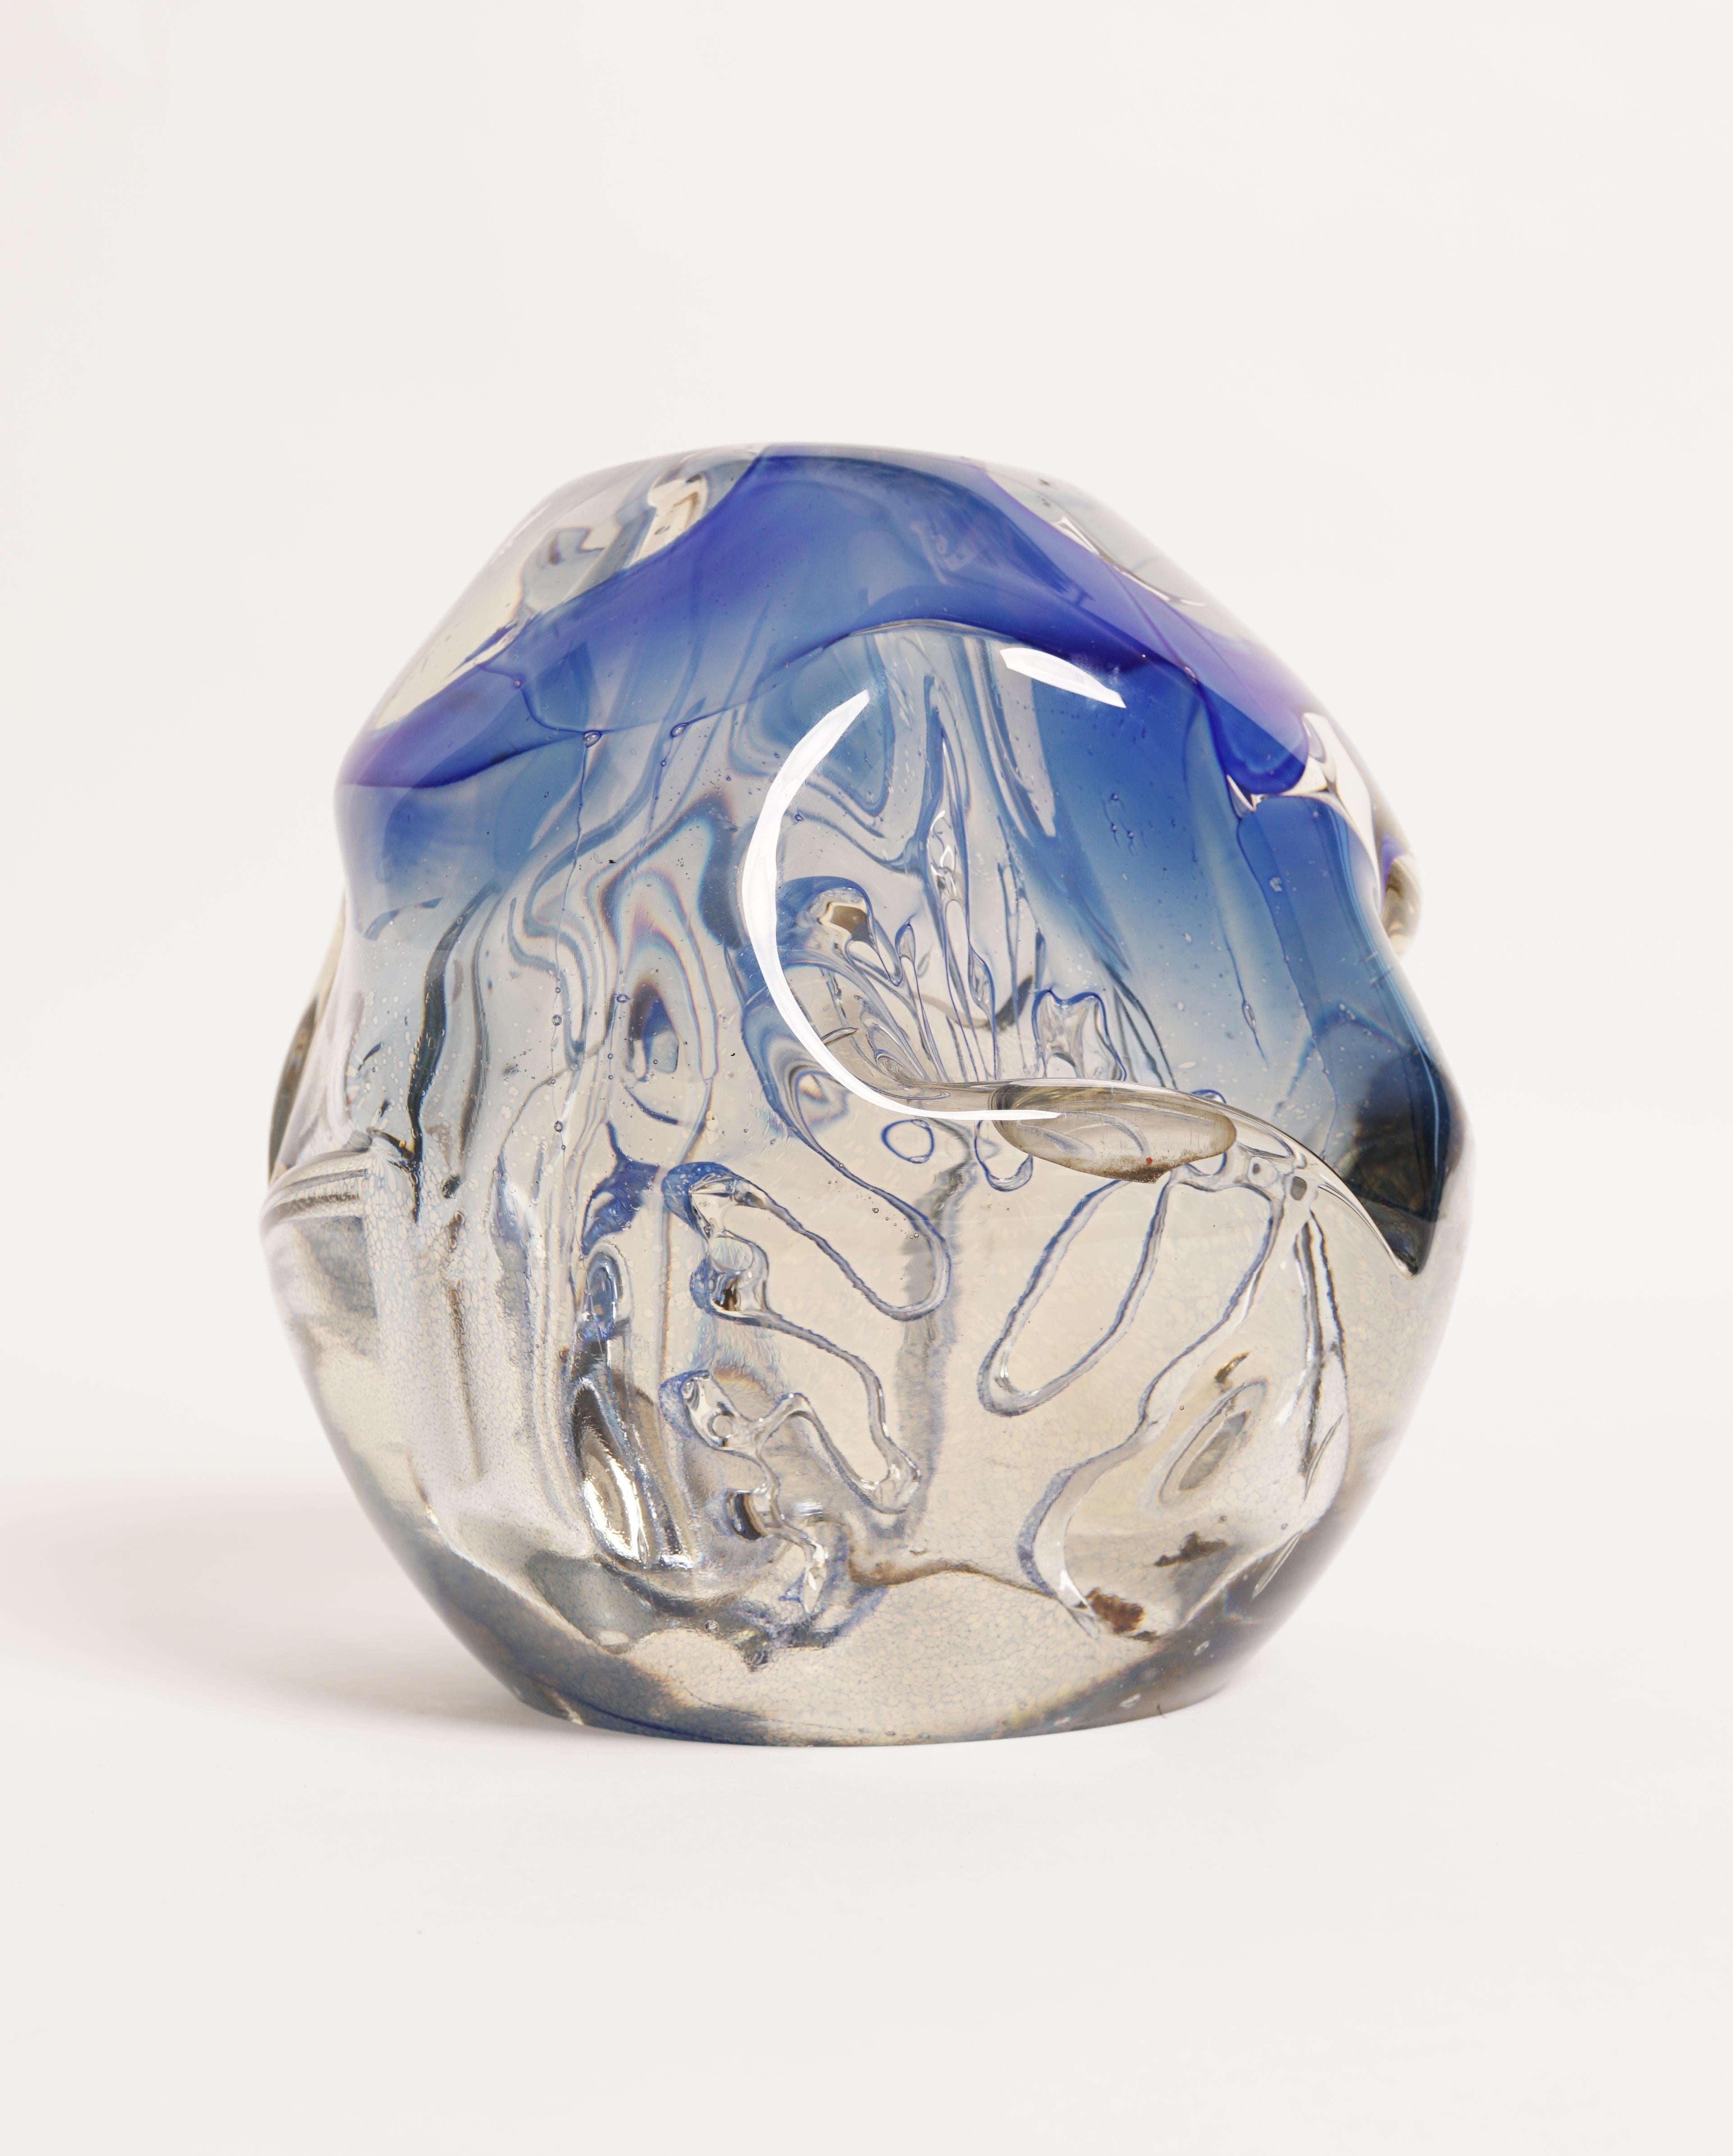 Andries Dirk Copier, 
'Unica', Vase, c. 1938
Execution: Blown glass, clear and blue.
Measure: H : 22 cm (8.6